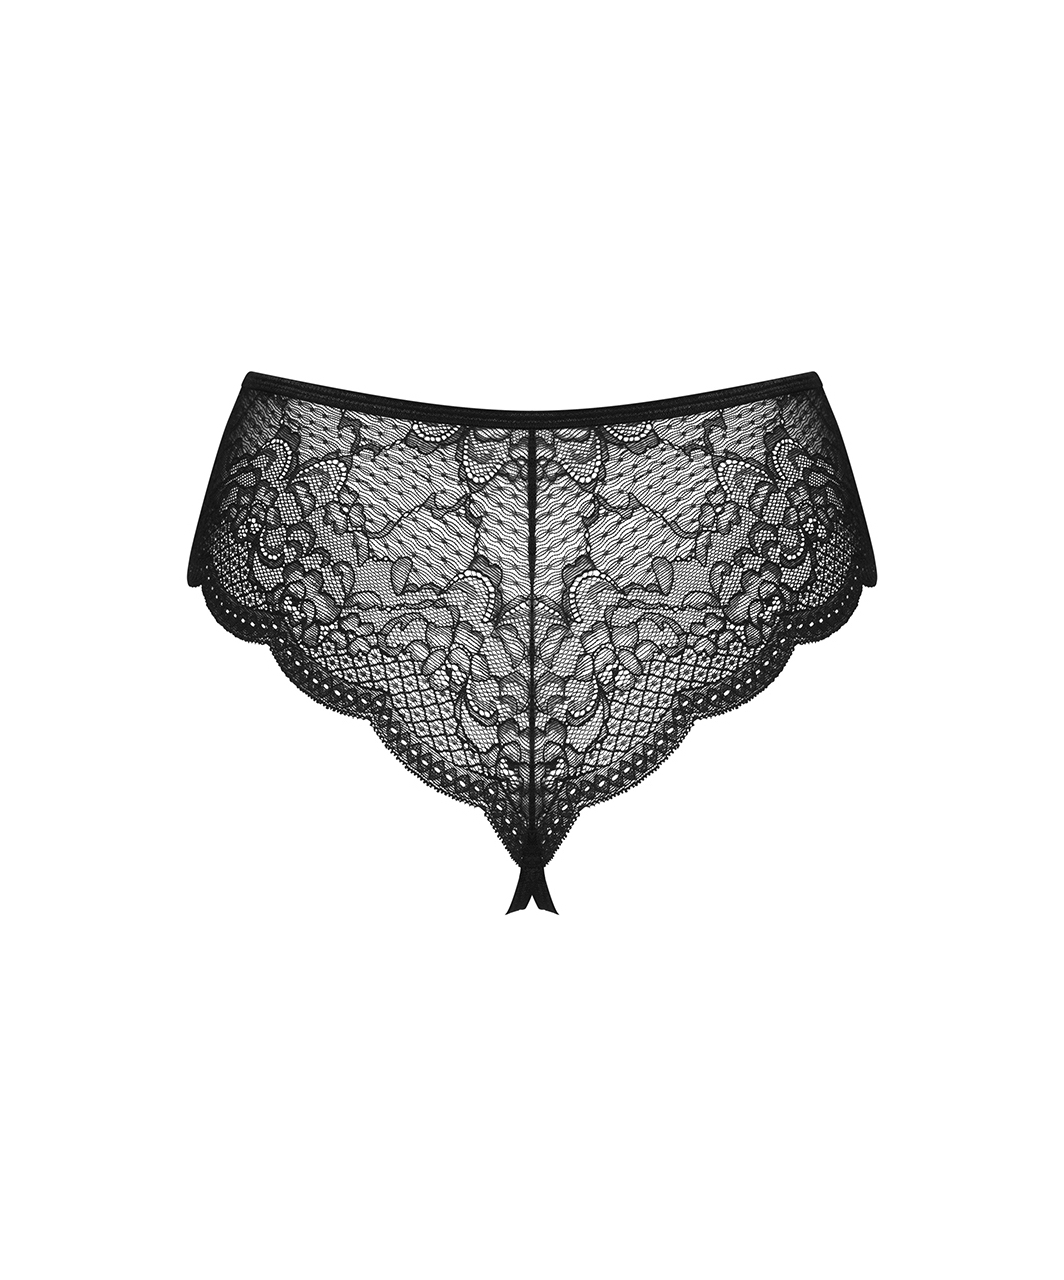 Obsessive Pearlove black lace crotchless thong